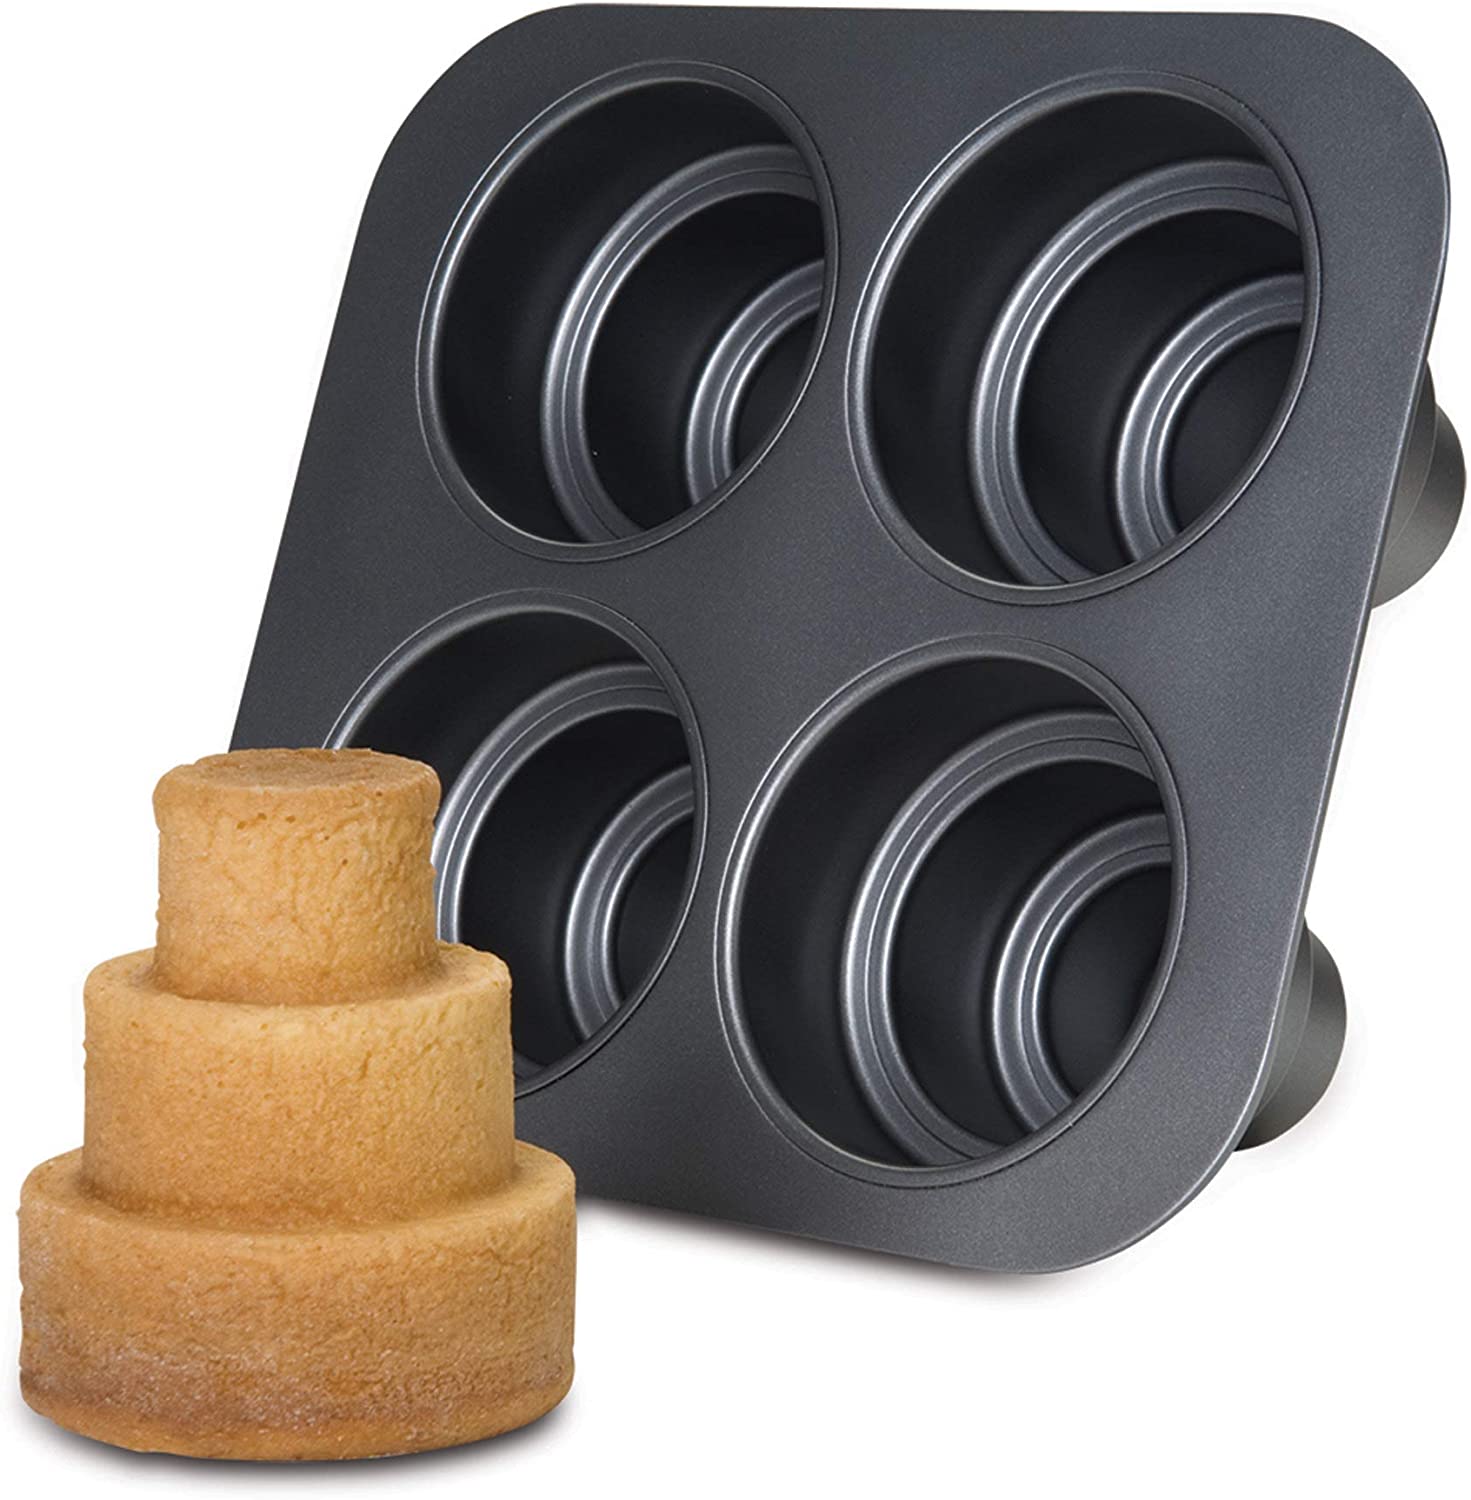 Everything You Need to Make Individual Mini Cake Pans — The Station Bakery